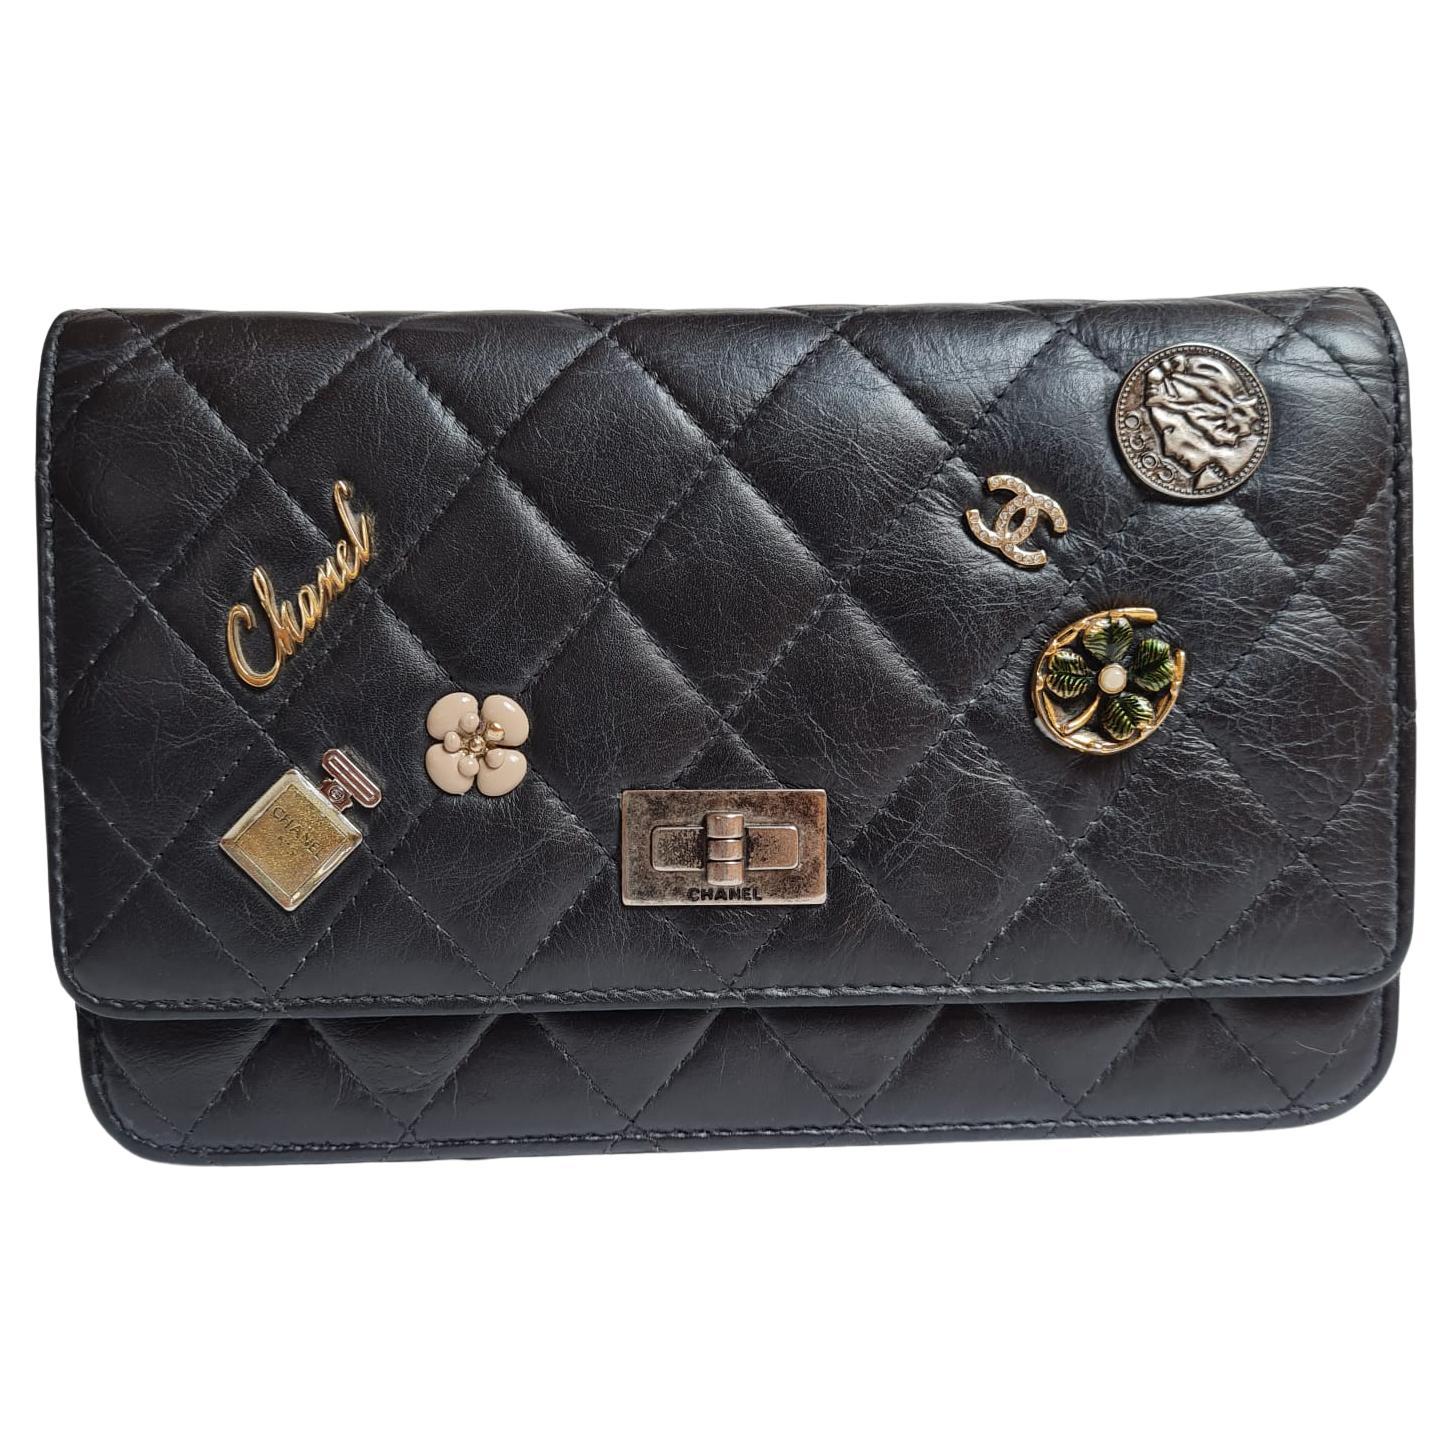 Chanel Black Lucky Charm Reissue Wallet on Chain